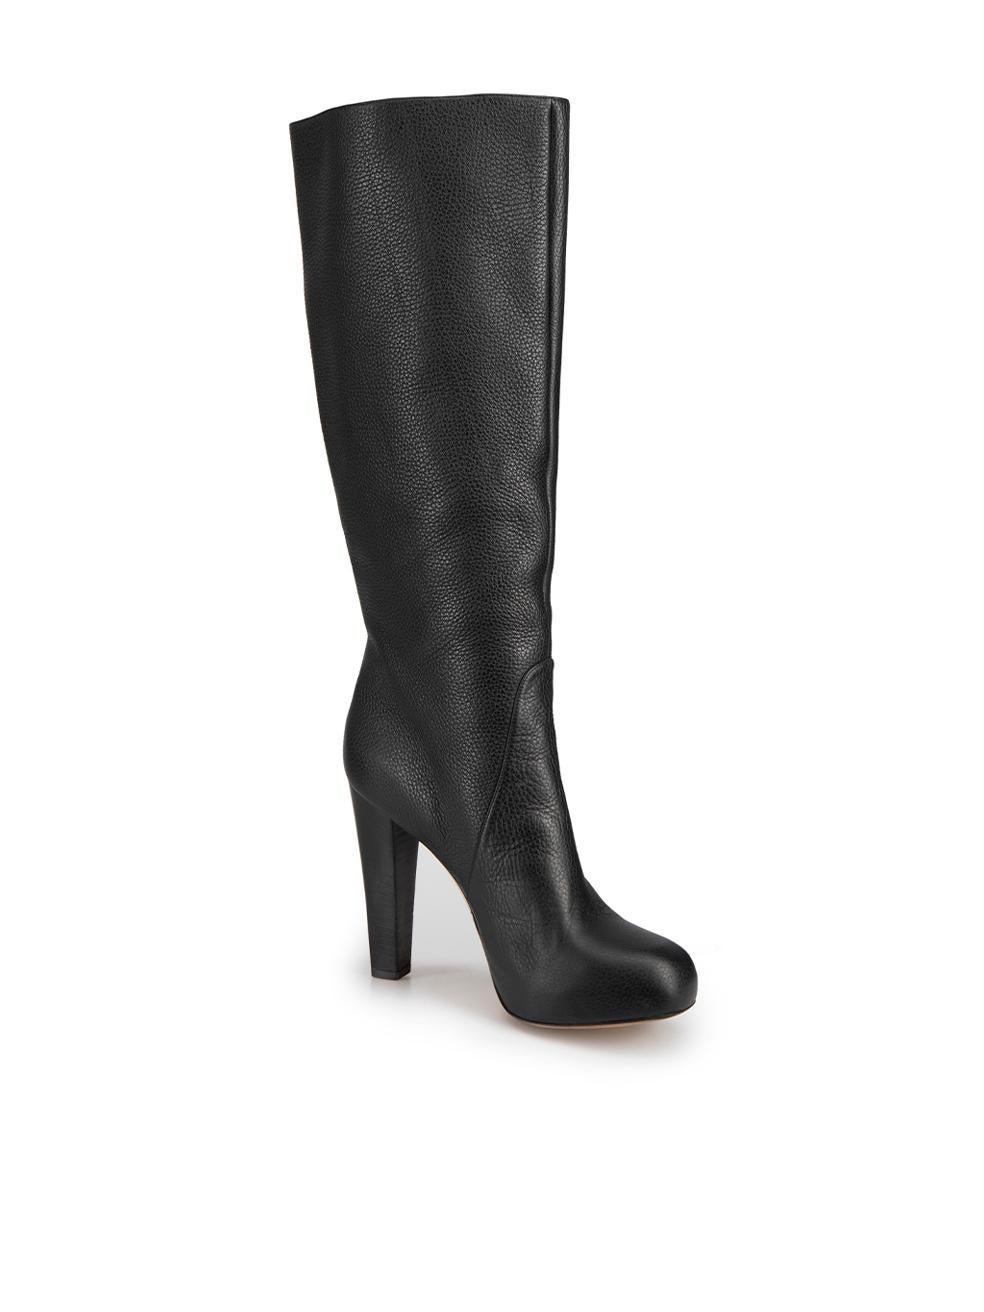 CONDITION is Very good. Hardly any visible wear to boots is evident on this used Escada designer resale item. These boots come with original bust bag.



Details


Black

Leather

Knee high boots

Eyelets accent

Round toe

High heel





Made in